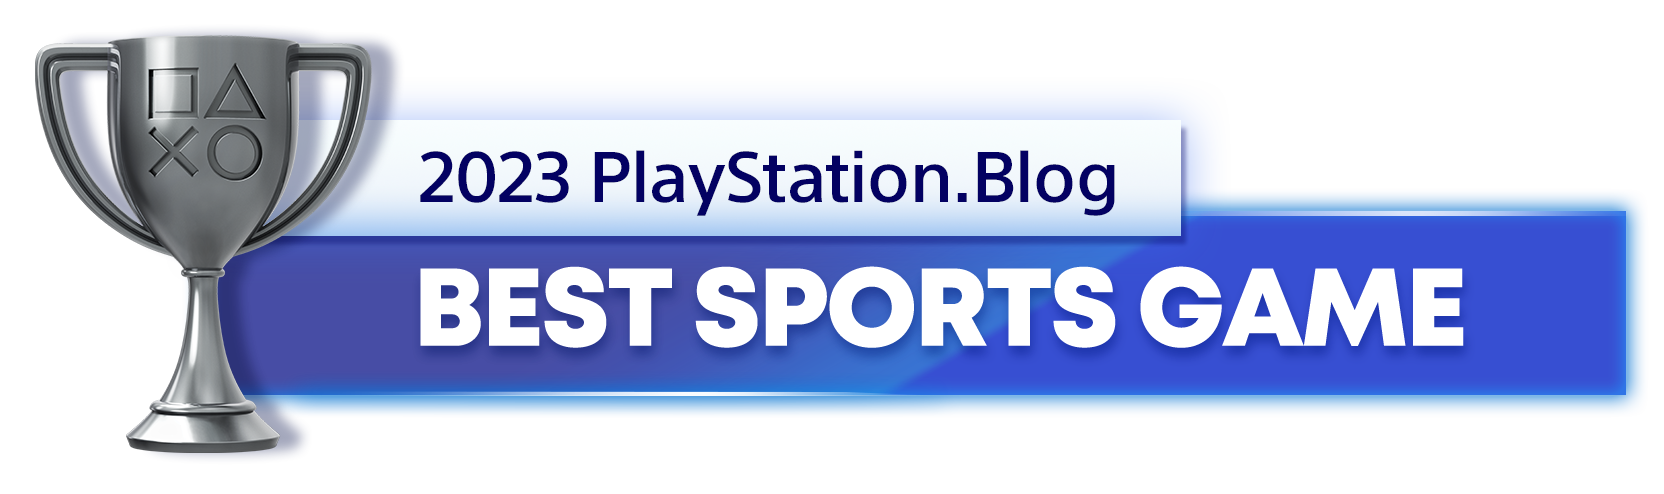  "Silver Trophy for the 2023 PlayStation Blog Best Sports Game Winner"